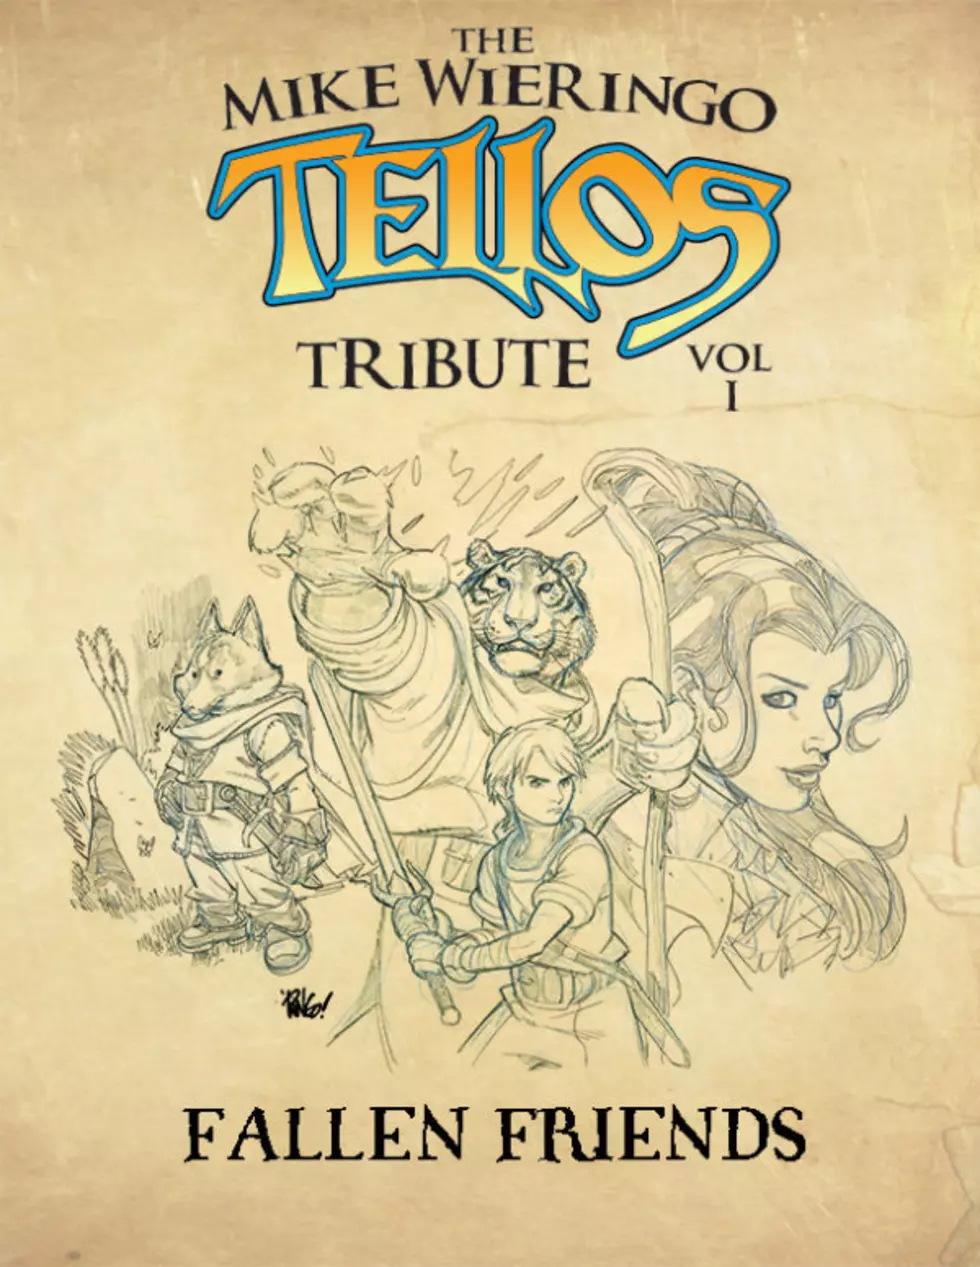 Artists Pay Homage To A Fallen Friend With &#8216;The Mike Wieringo Tellos Tribute&#8217;